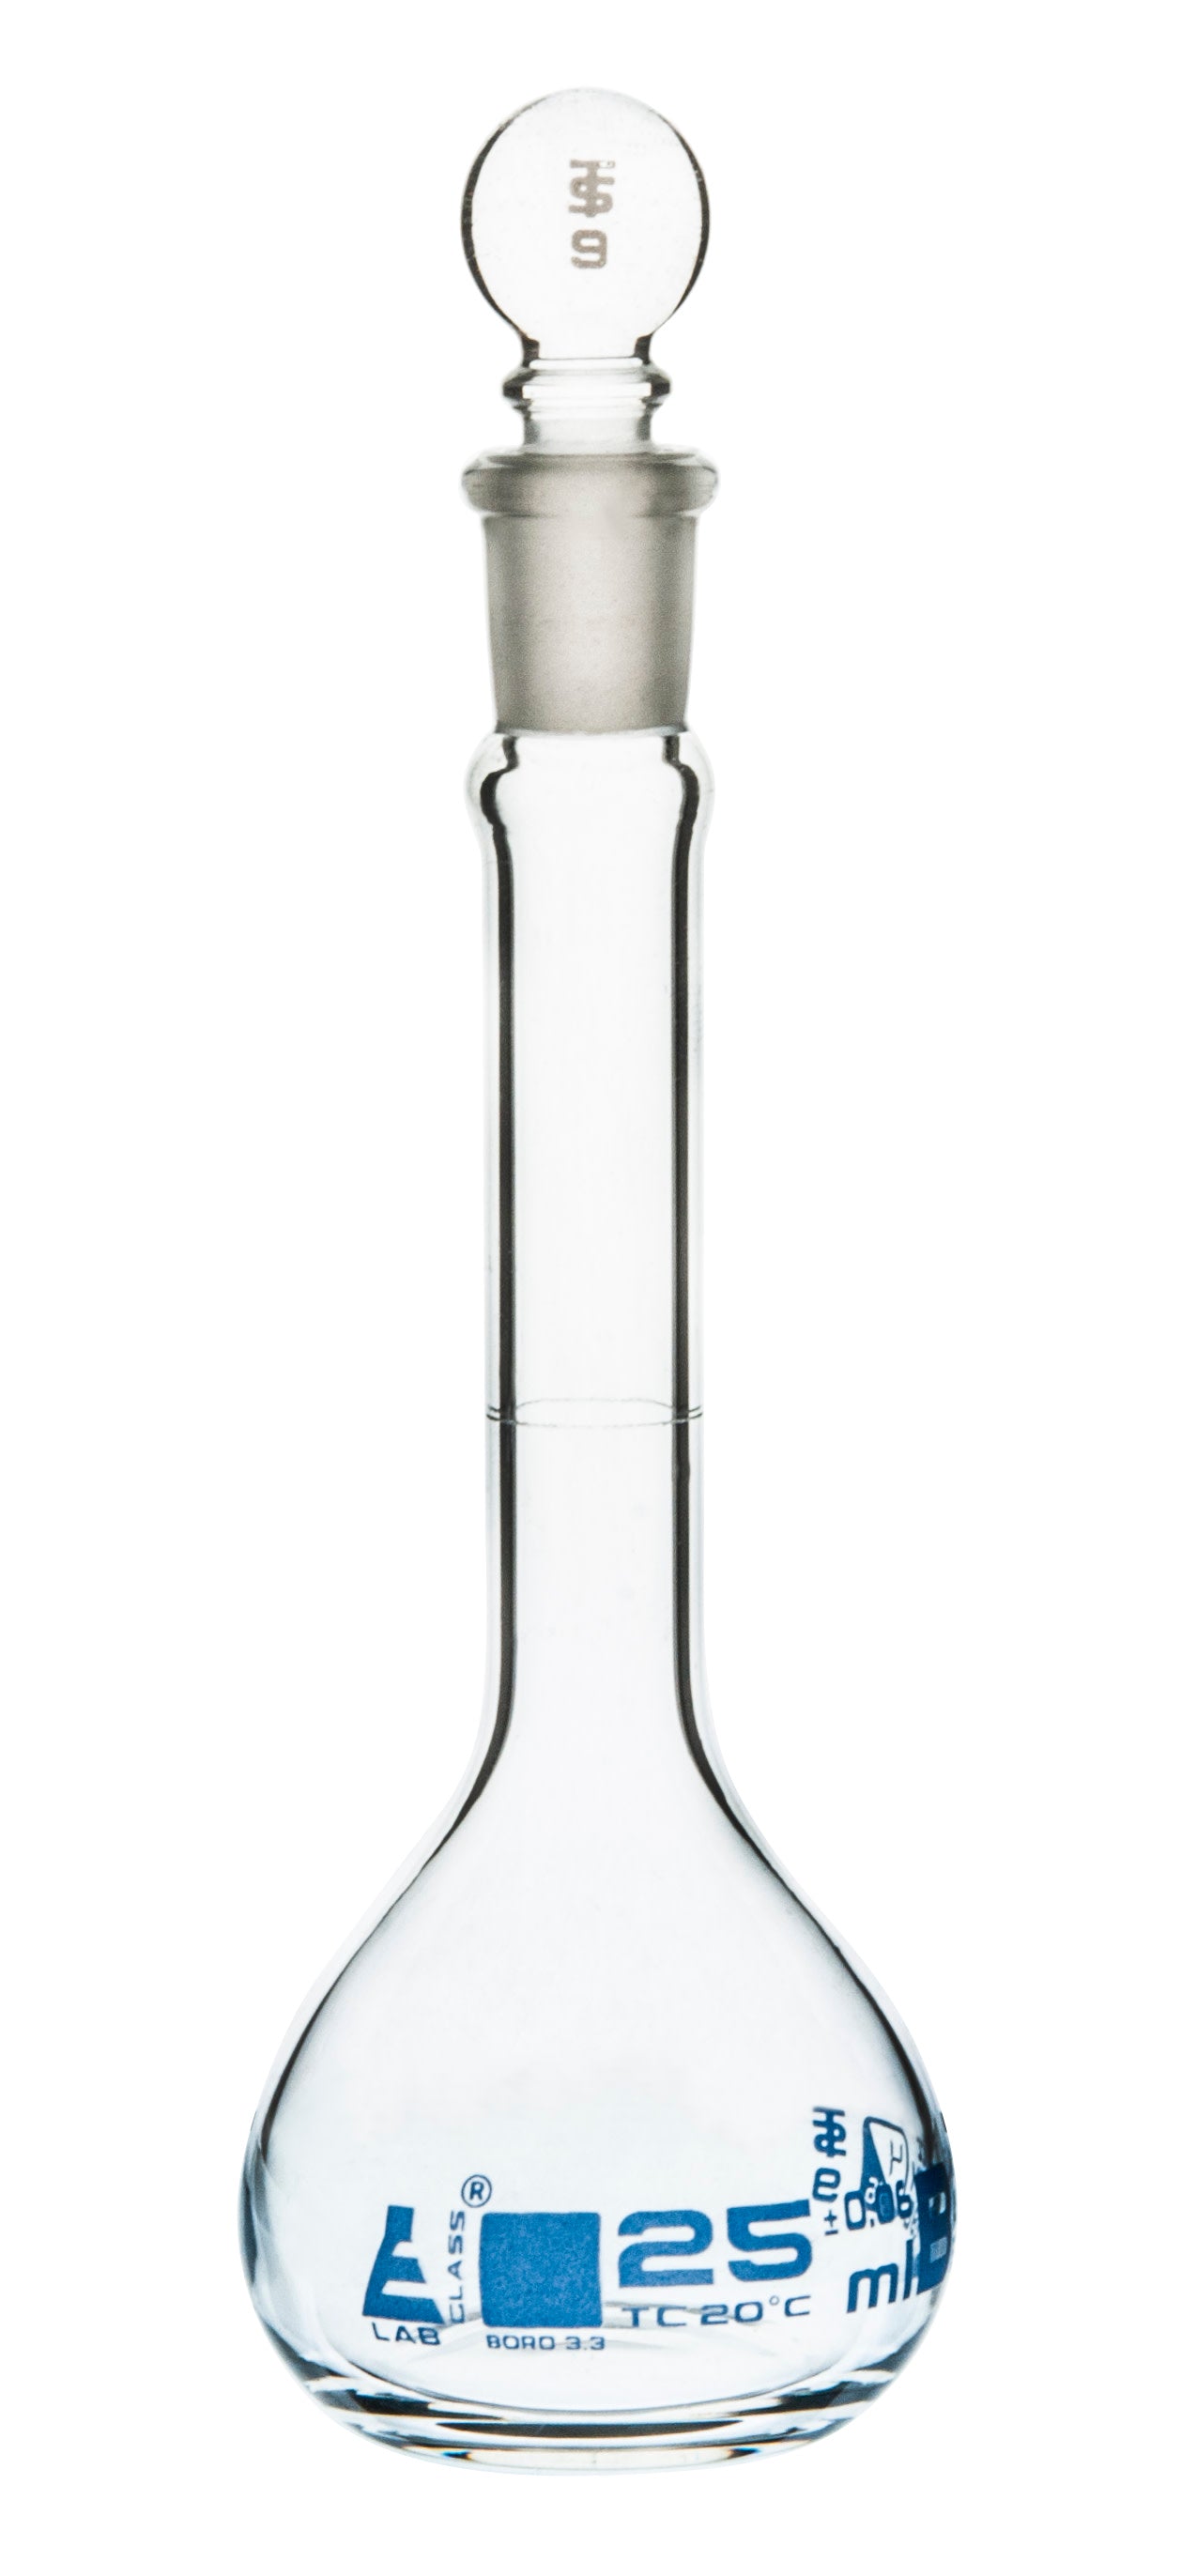 Borosilicate Glass ASTM Volumetric Flask with Glass Stopper, 25 ml, Class B, Autoclavable